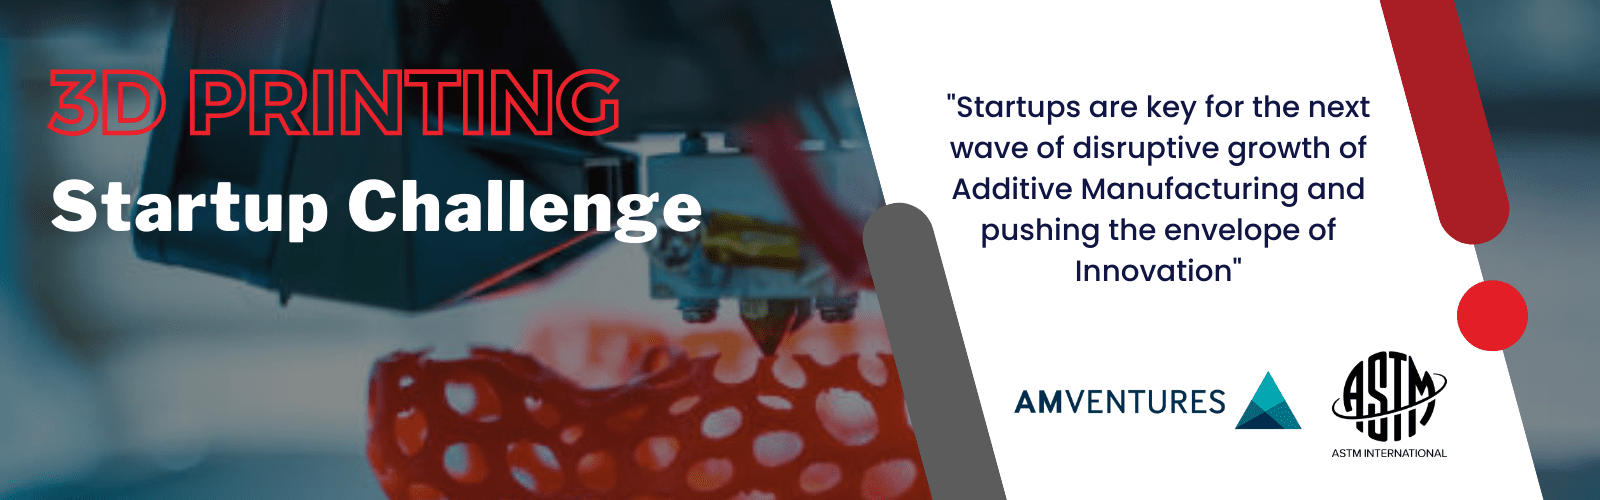 AMTech announces 3D Printing Startup Challenge to promote the startup ecosystem in the region